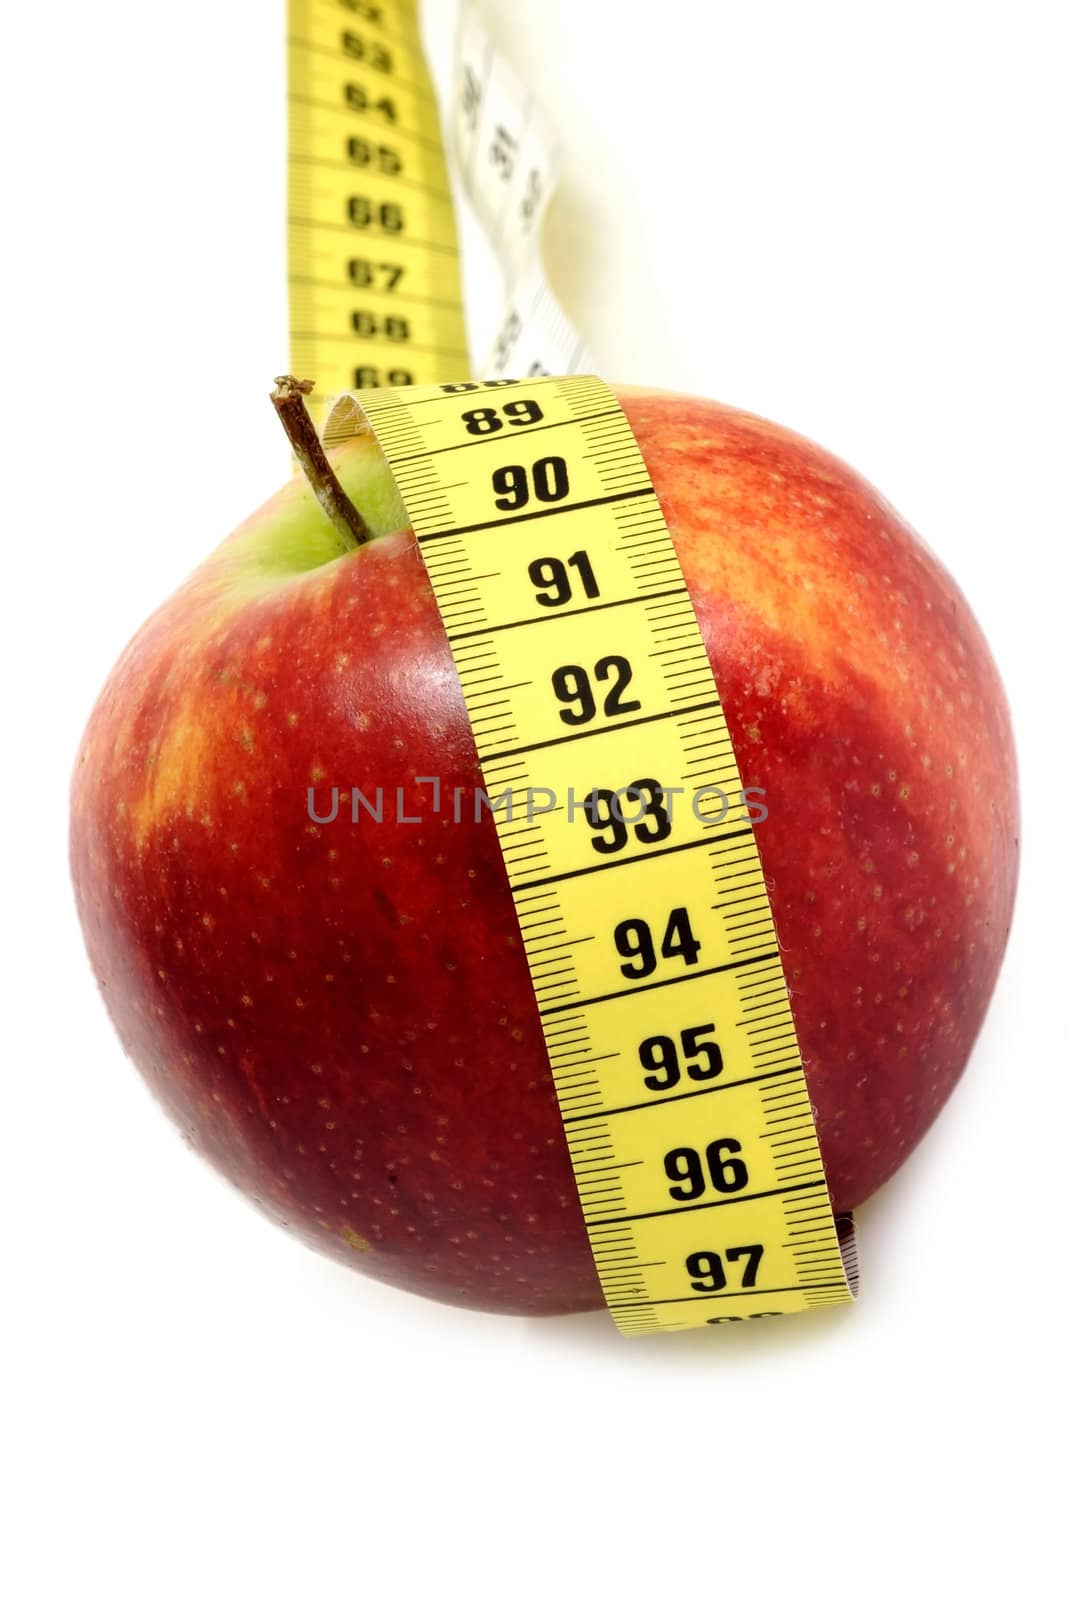 Red apple with tape measure on bright background